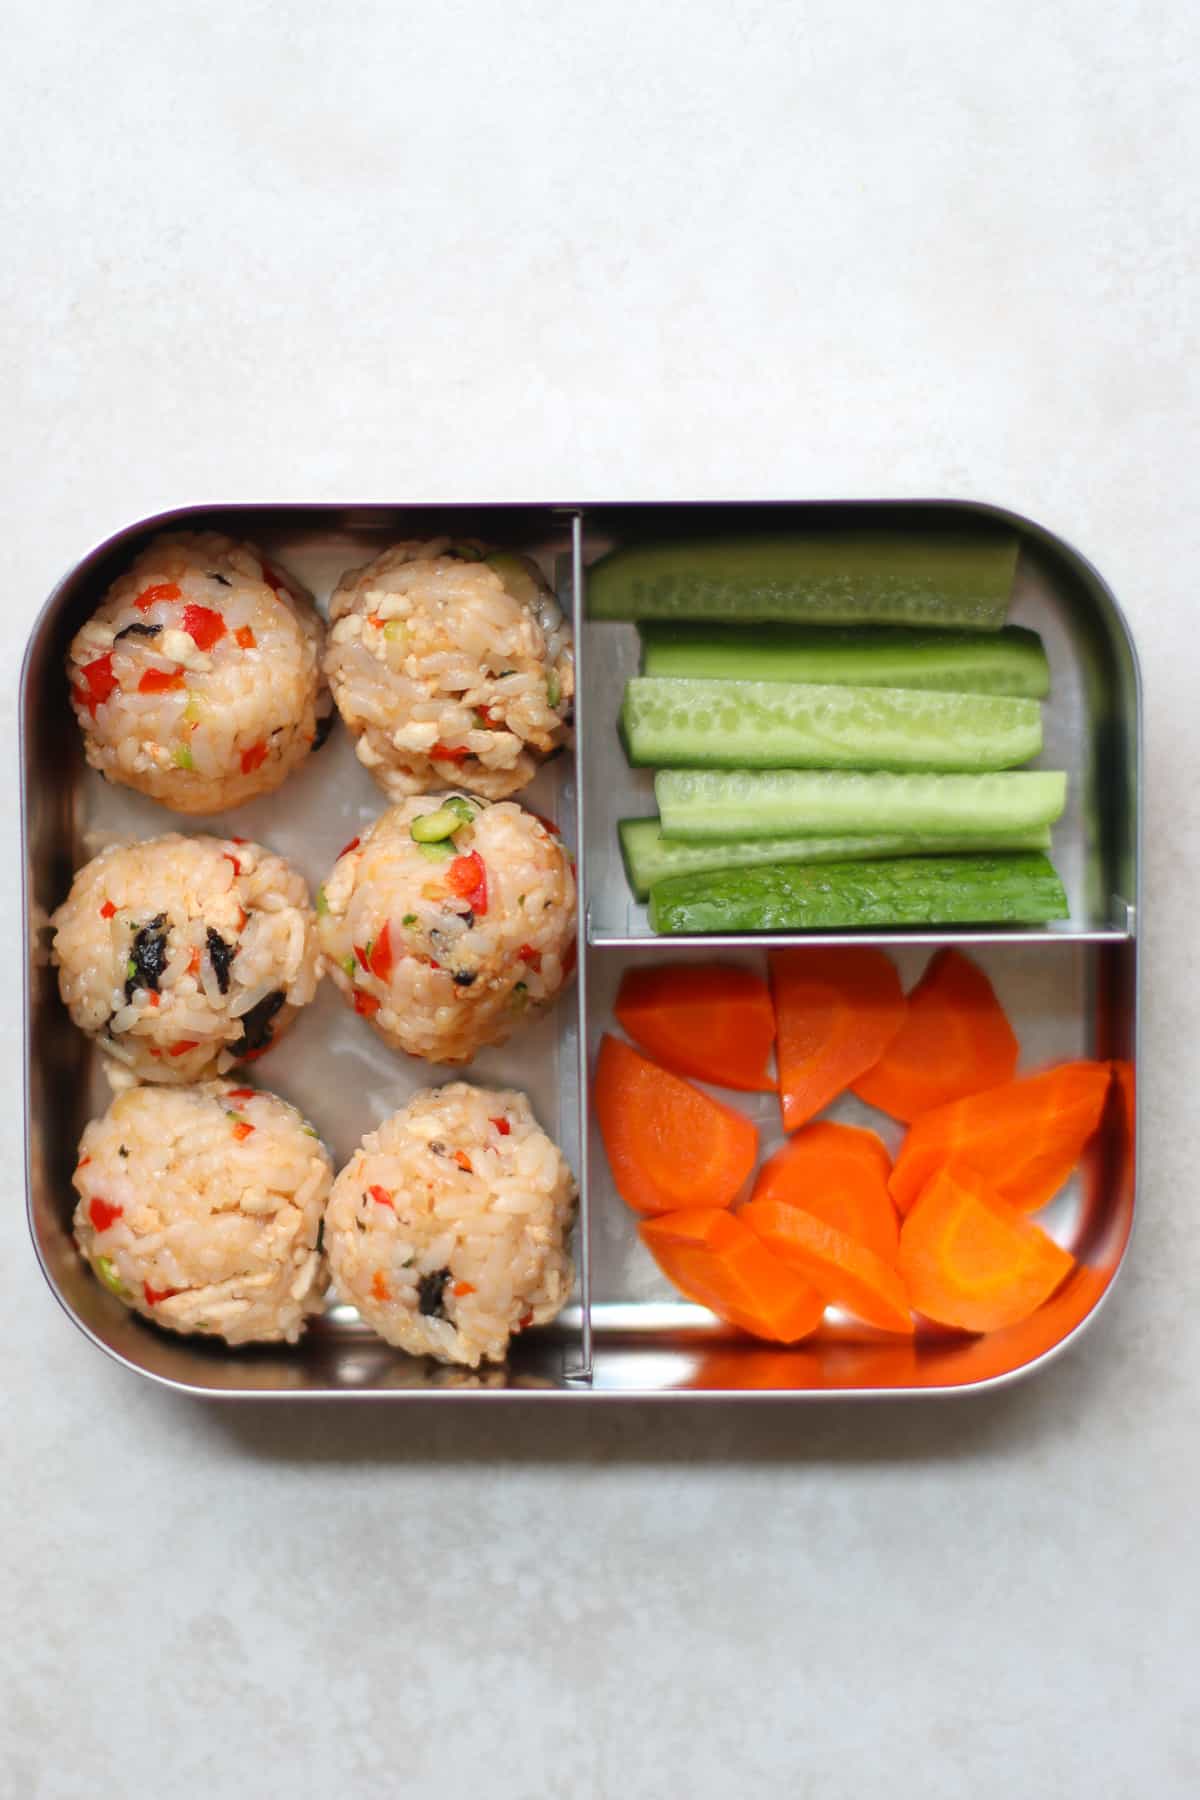 Six rice balls in a stainless steel lunchbox with cucumbers and carrots.